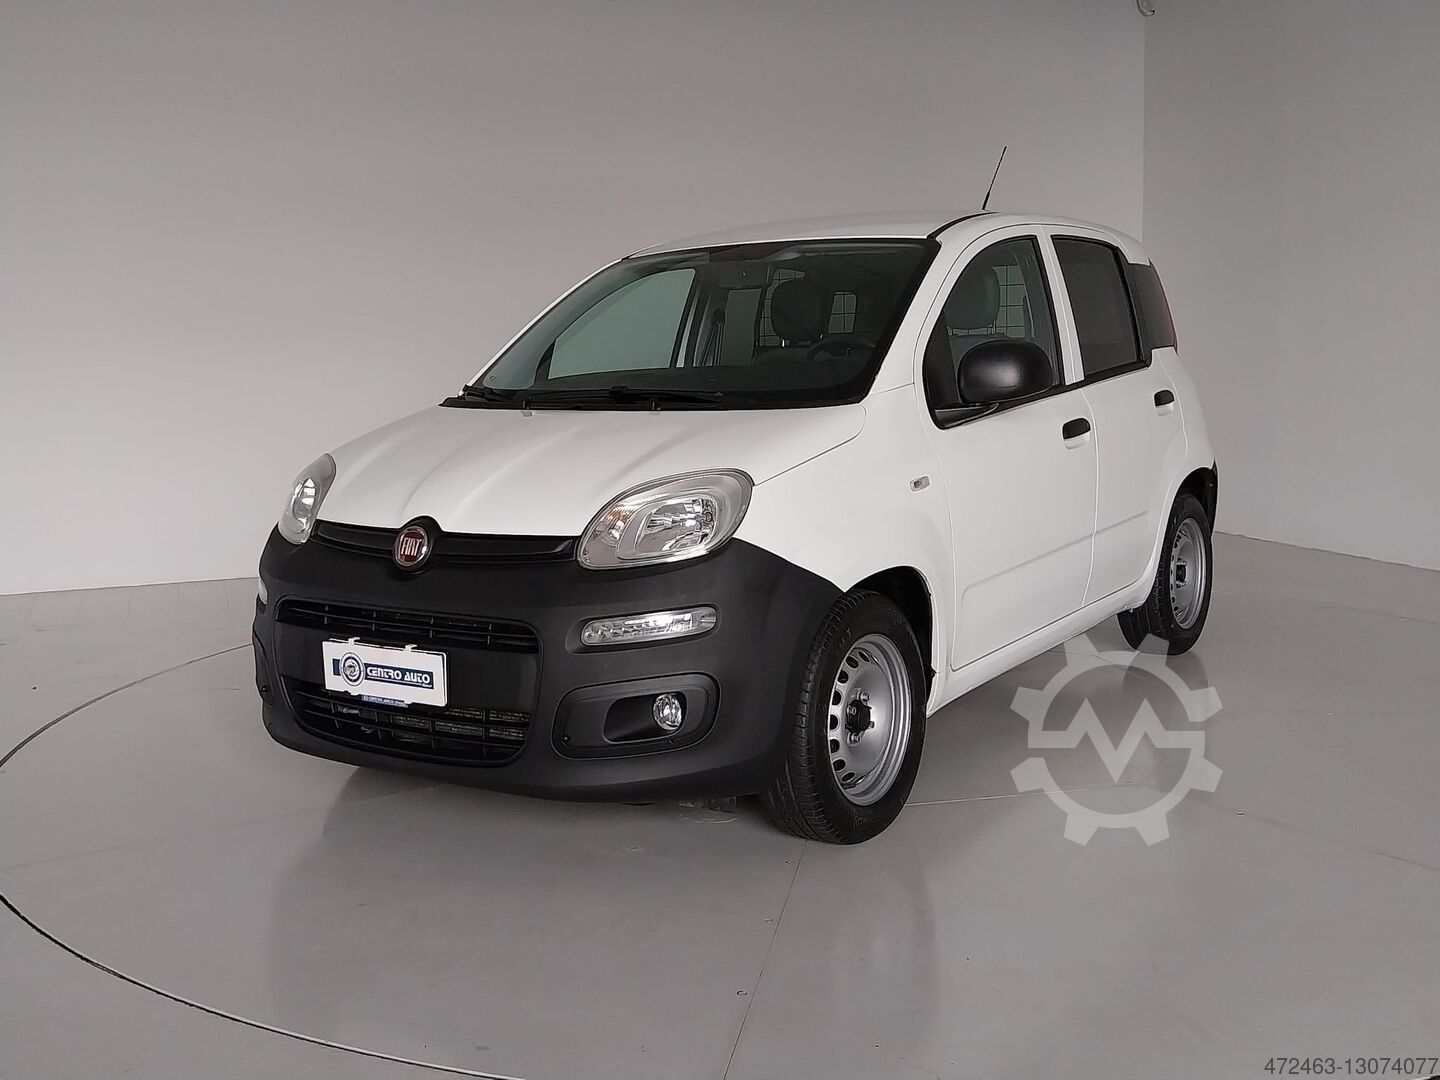 Fiat Panda 4x4 Imported To India For Testing